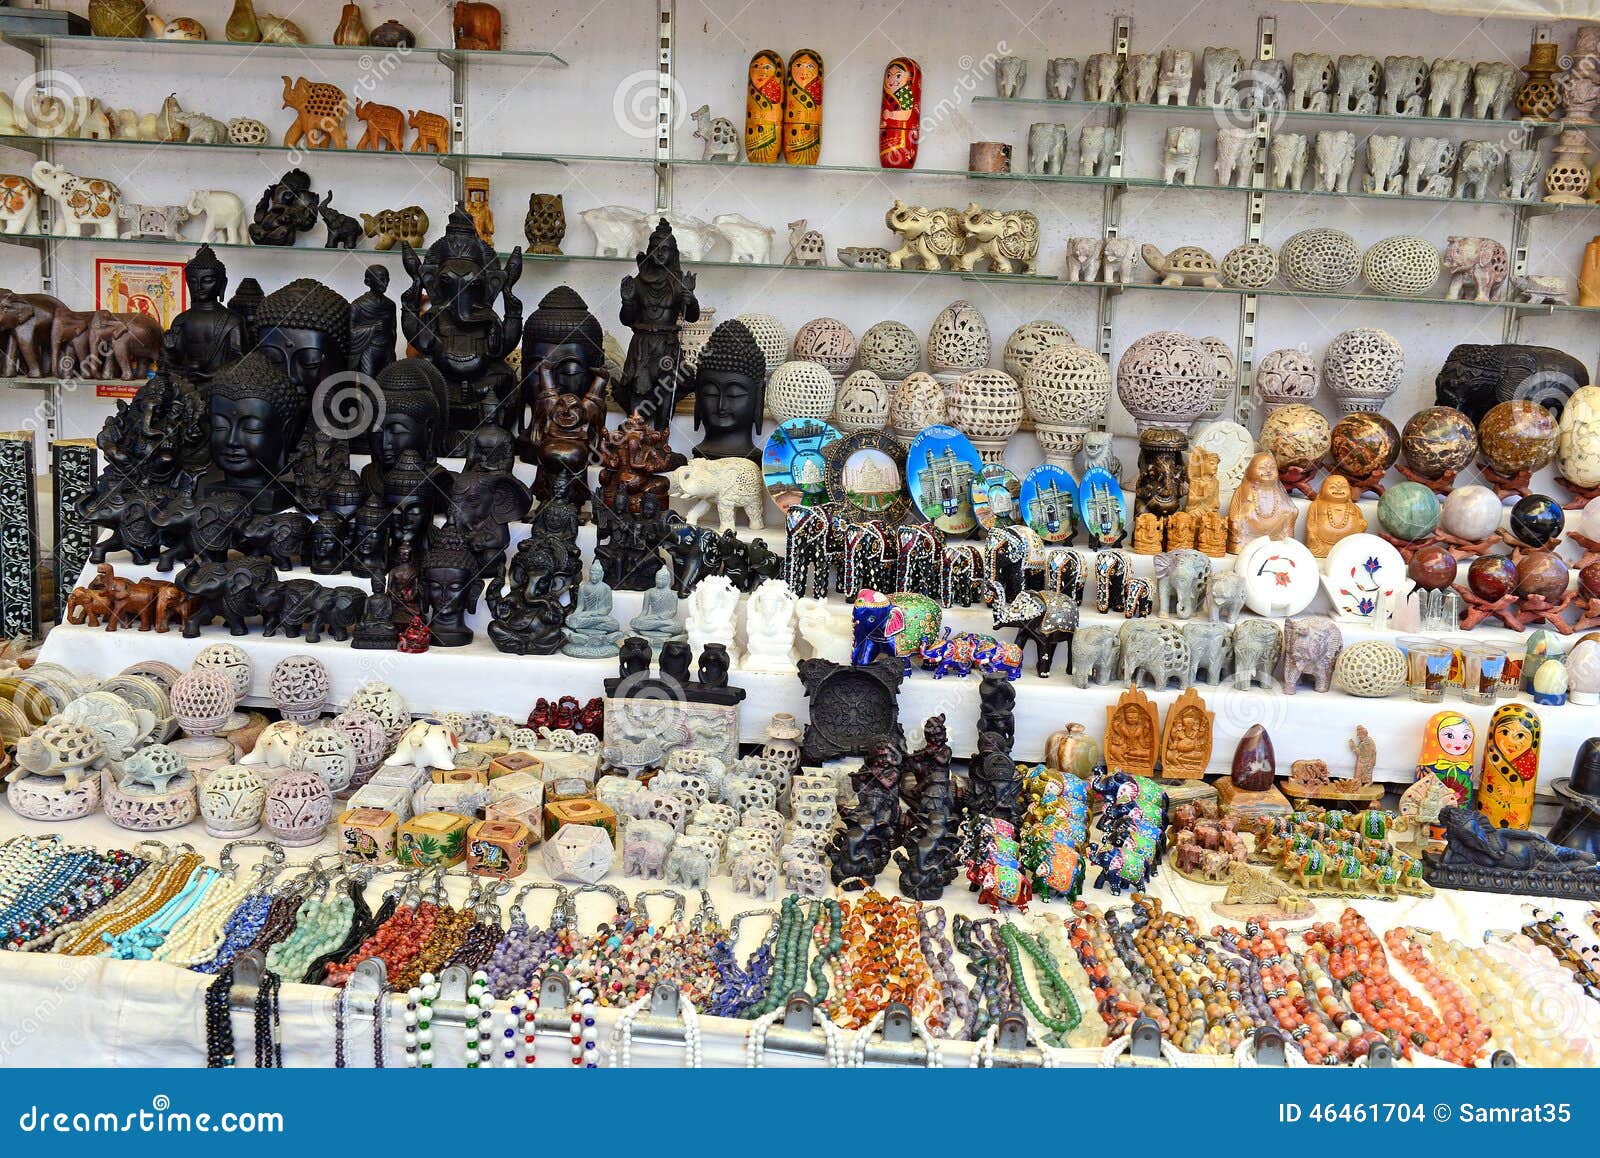 Handicrafts Item stock photo. Image of display, color - 46461704